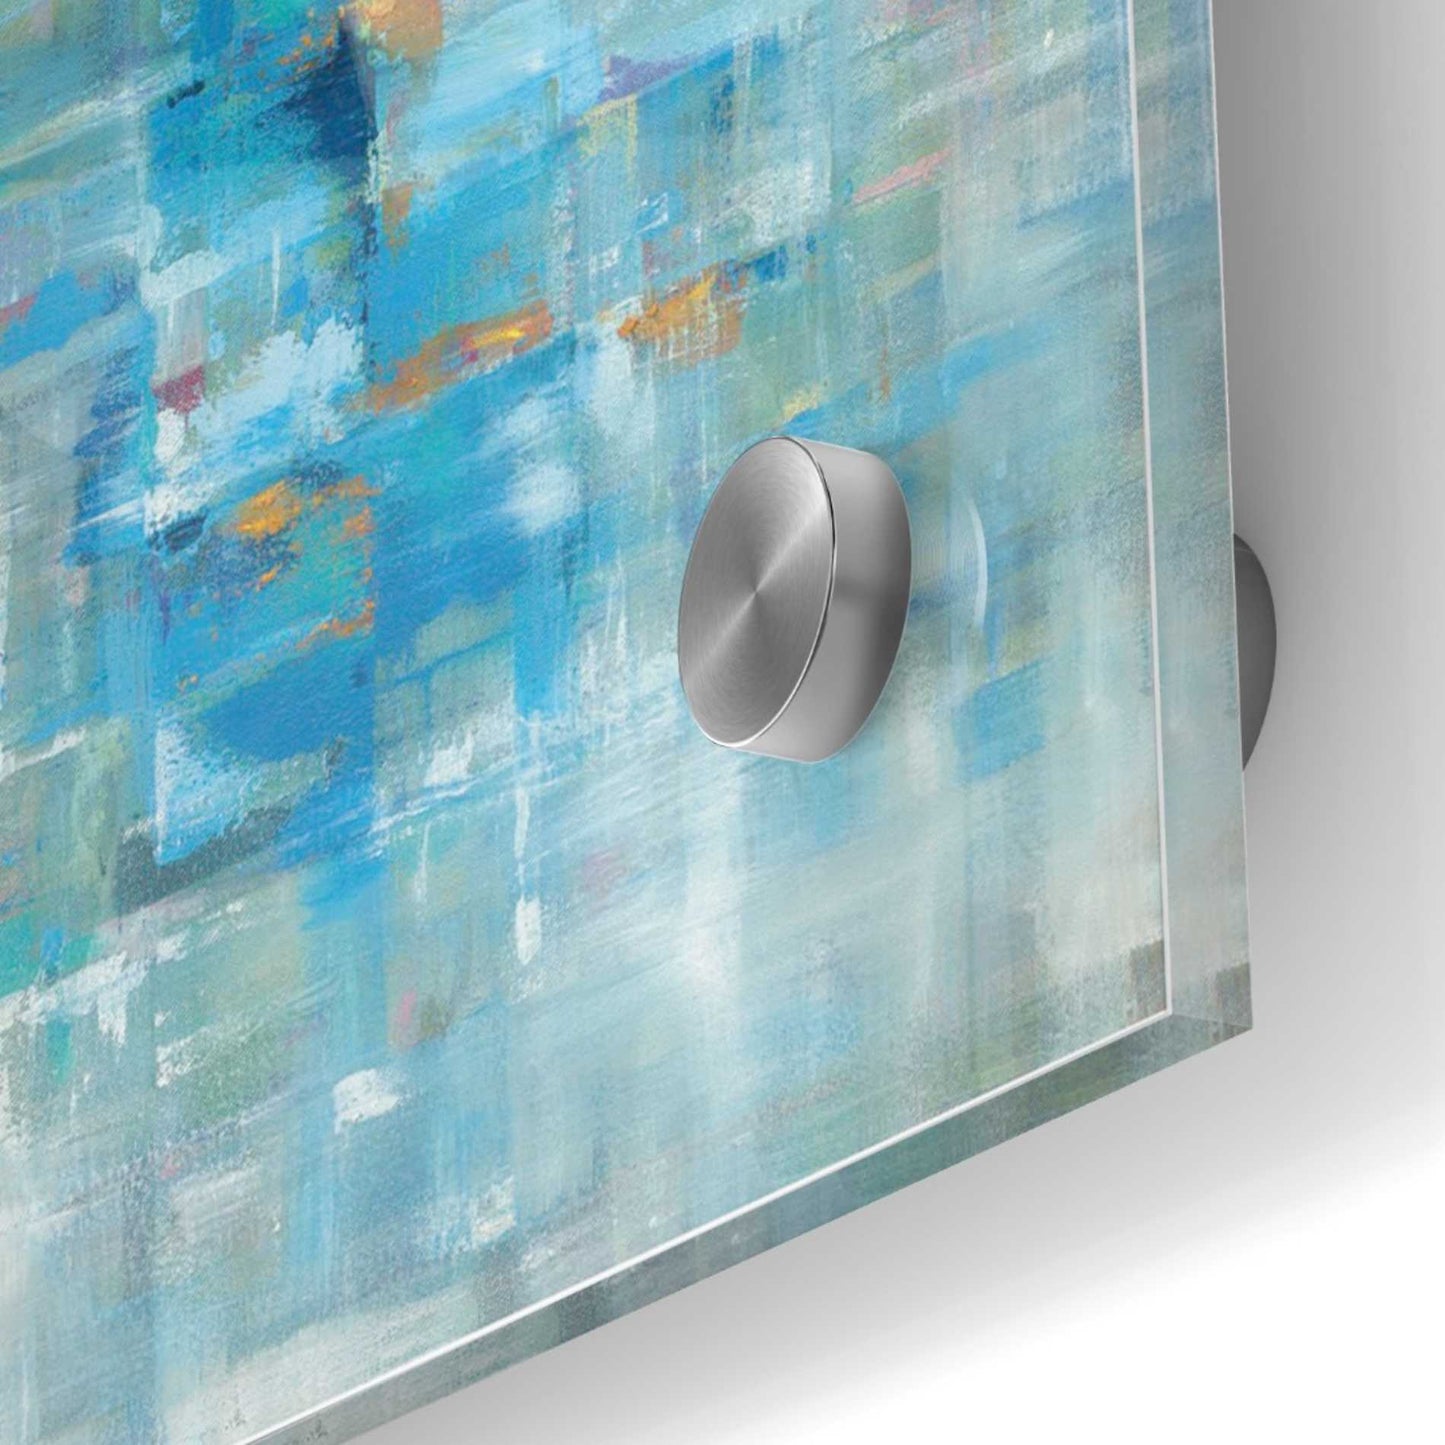 Epic Art 'Abstract Squares' by Danhui Nai, Acrylic Glass Wall Art,24x24